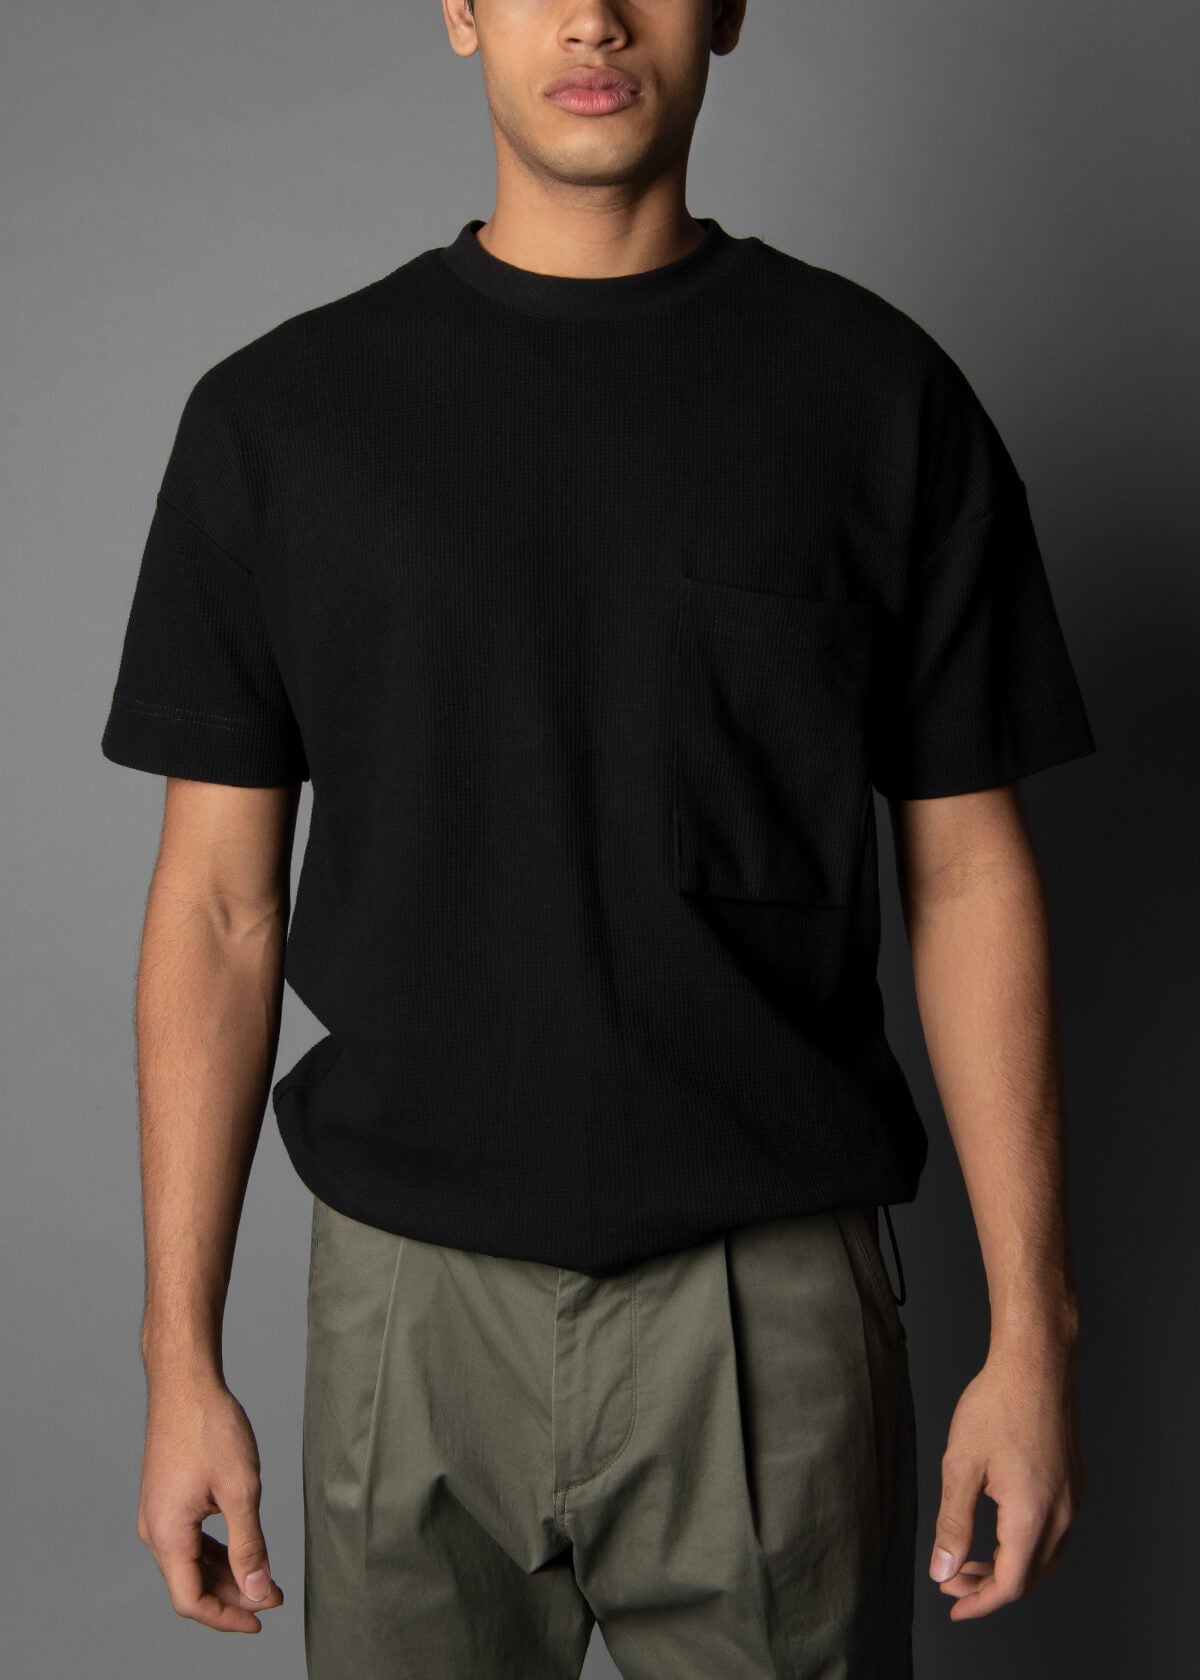 mens tshirt in black with crew neck